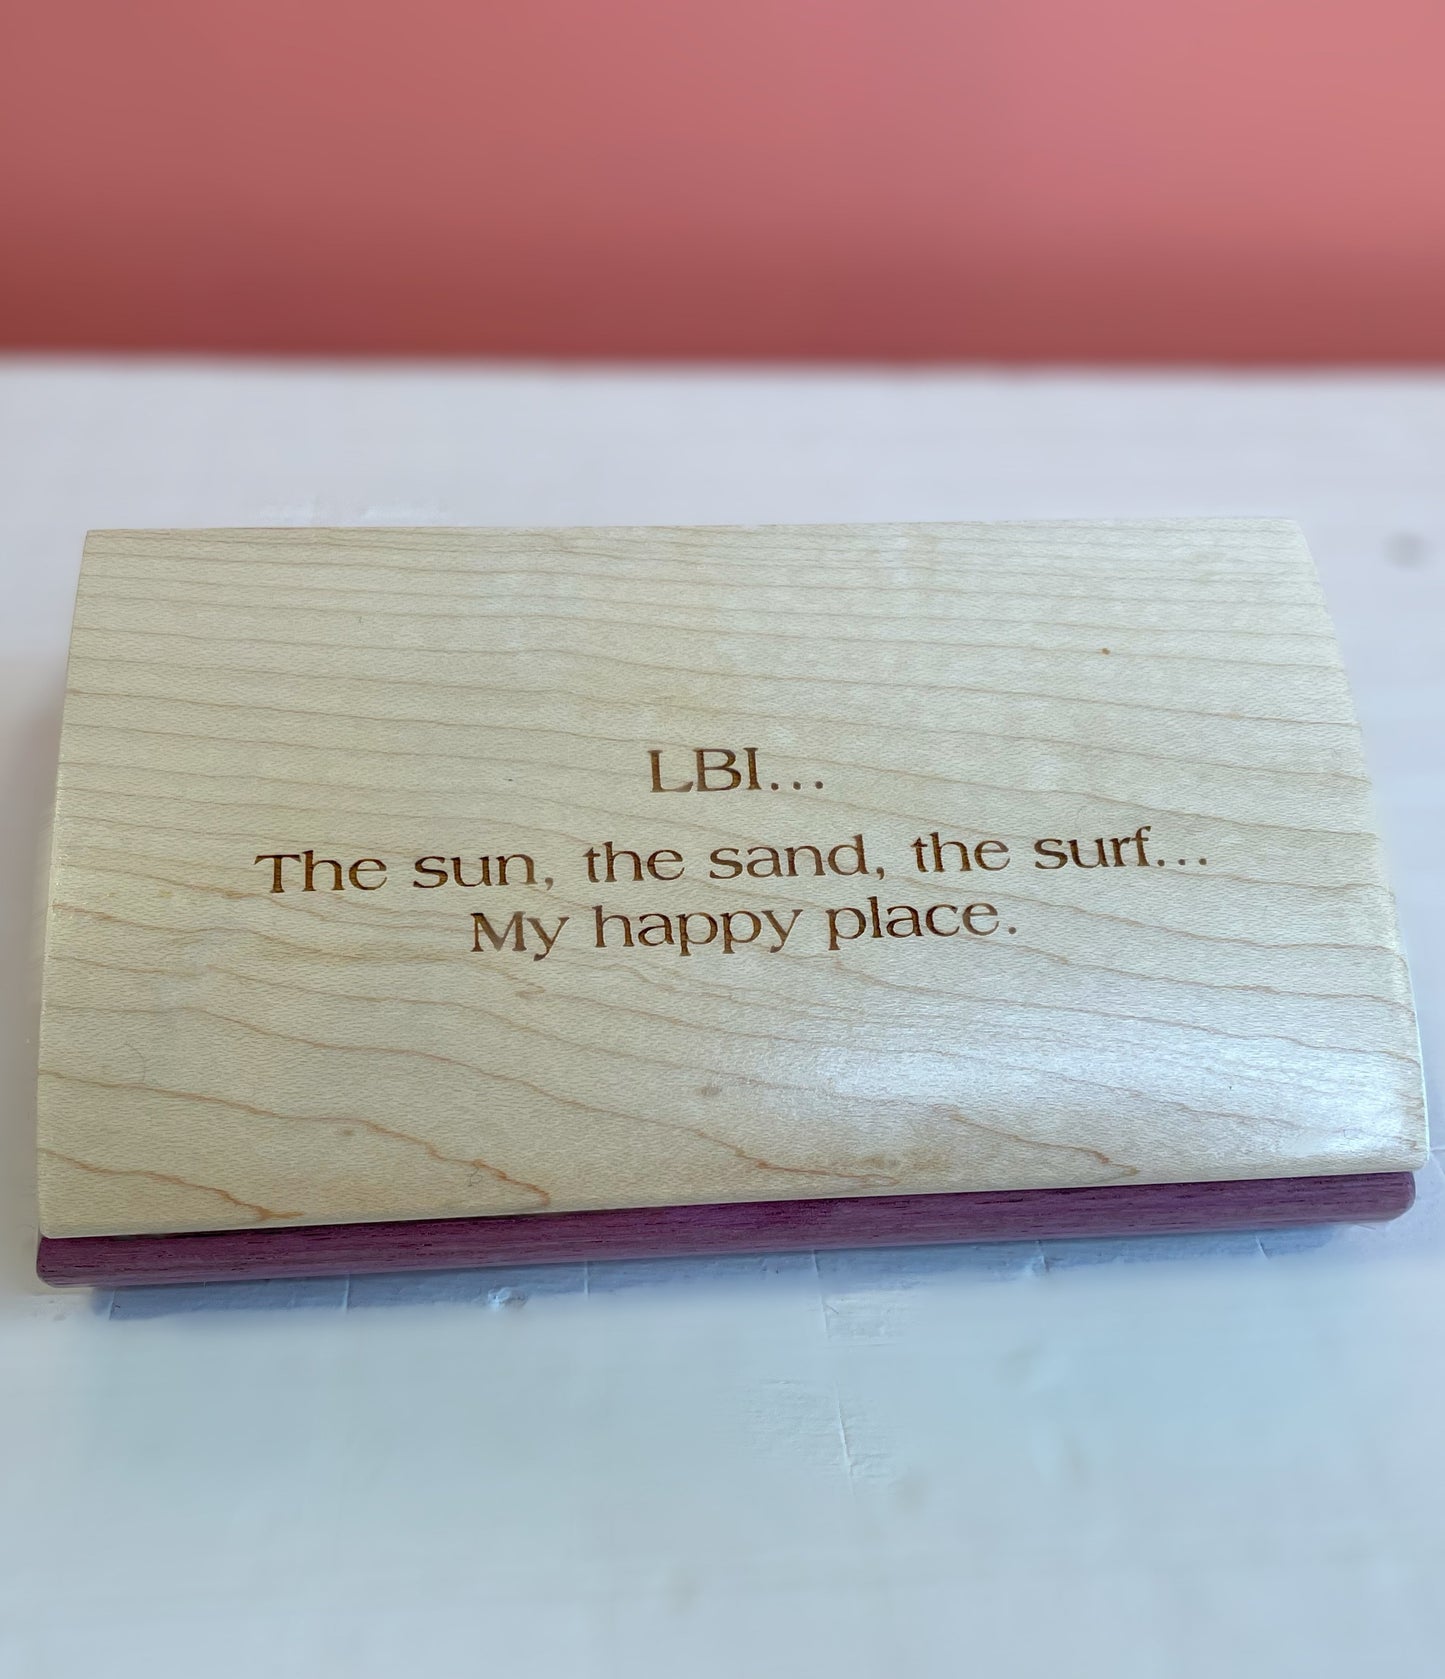 Mikutowski Woodworking Inspirational Box - LBI - My Happy Place available at The Good Life Boutique